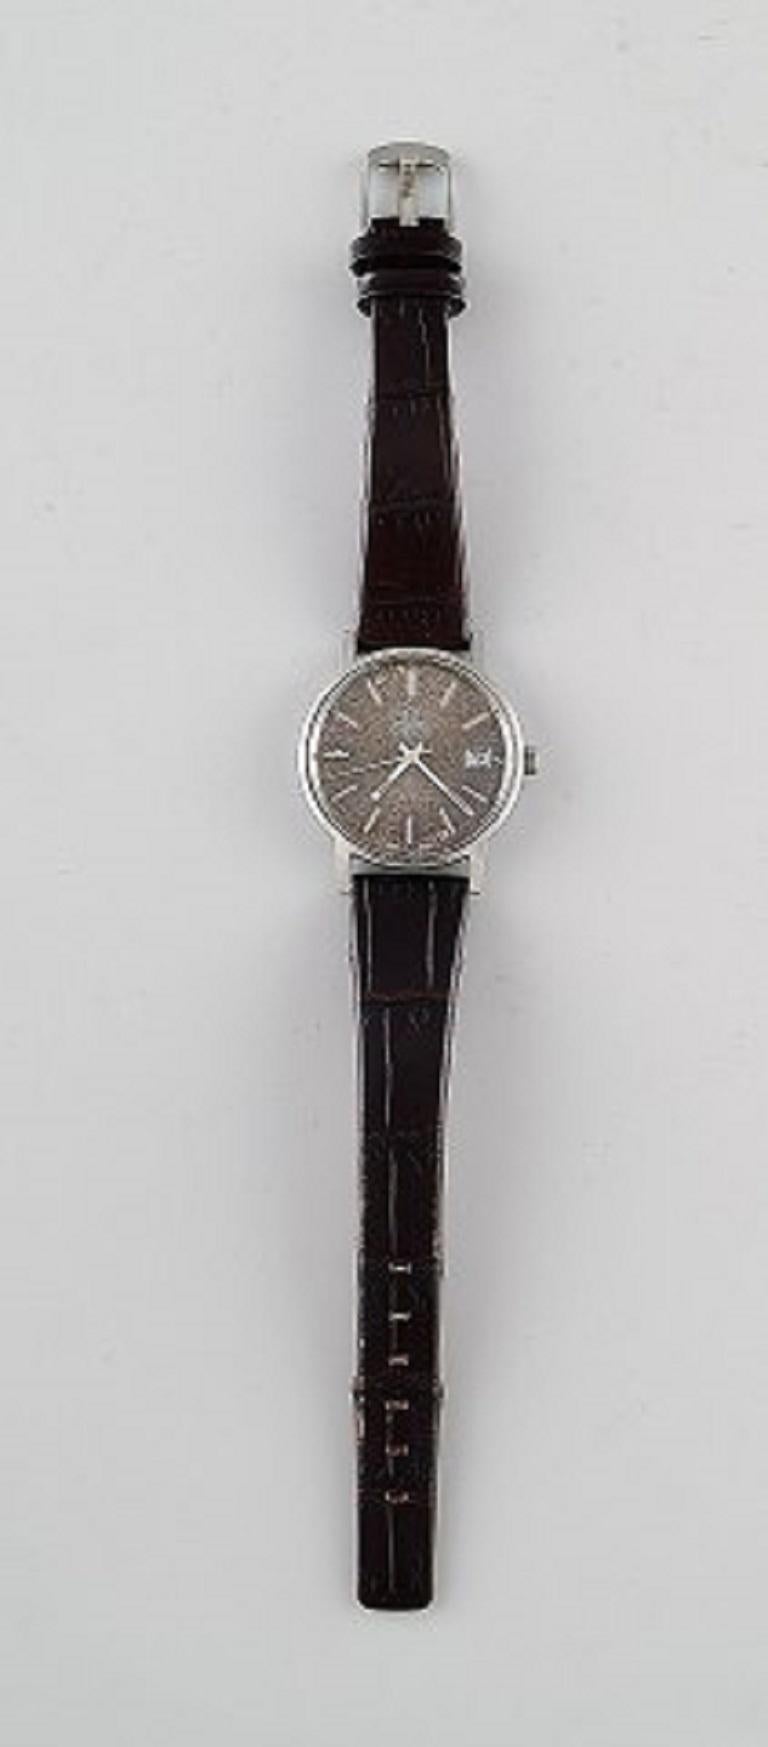 Omega Genéve Automatic, Vintage Men's Wrist Watch, 1960s.
In very good condition.
The clock works.
Diameter 35 mm.